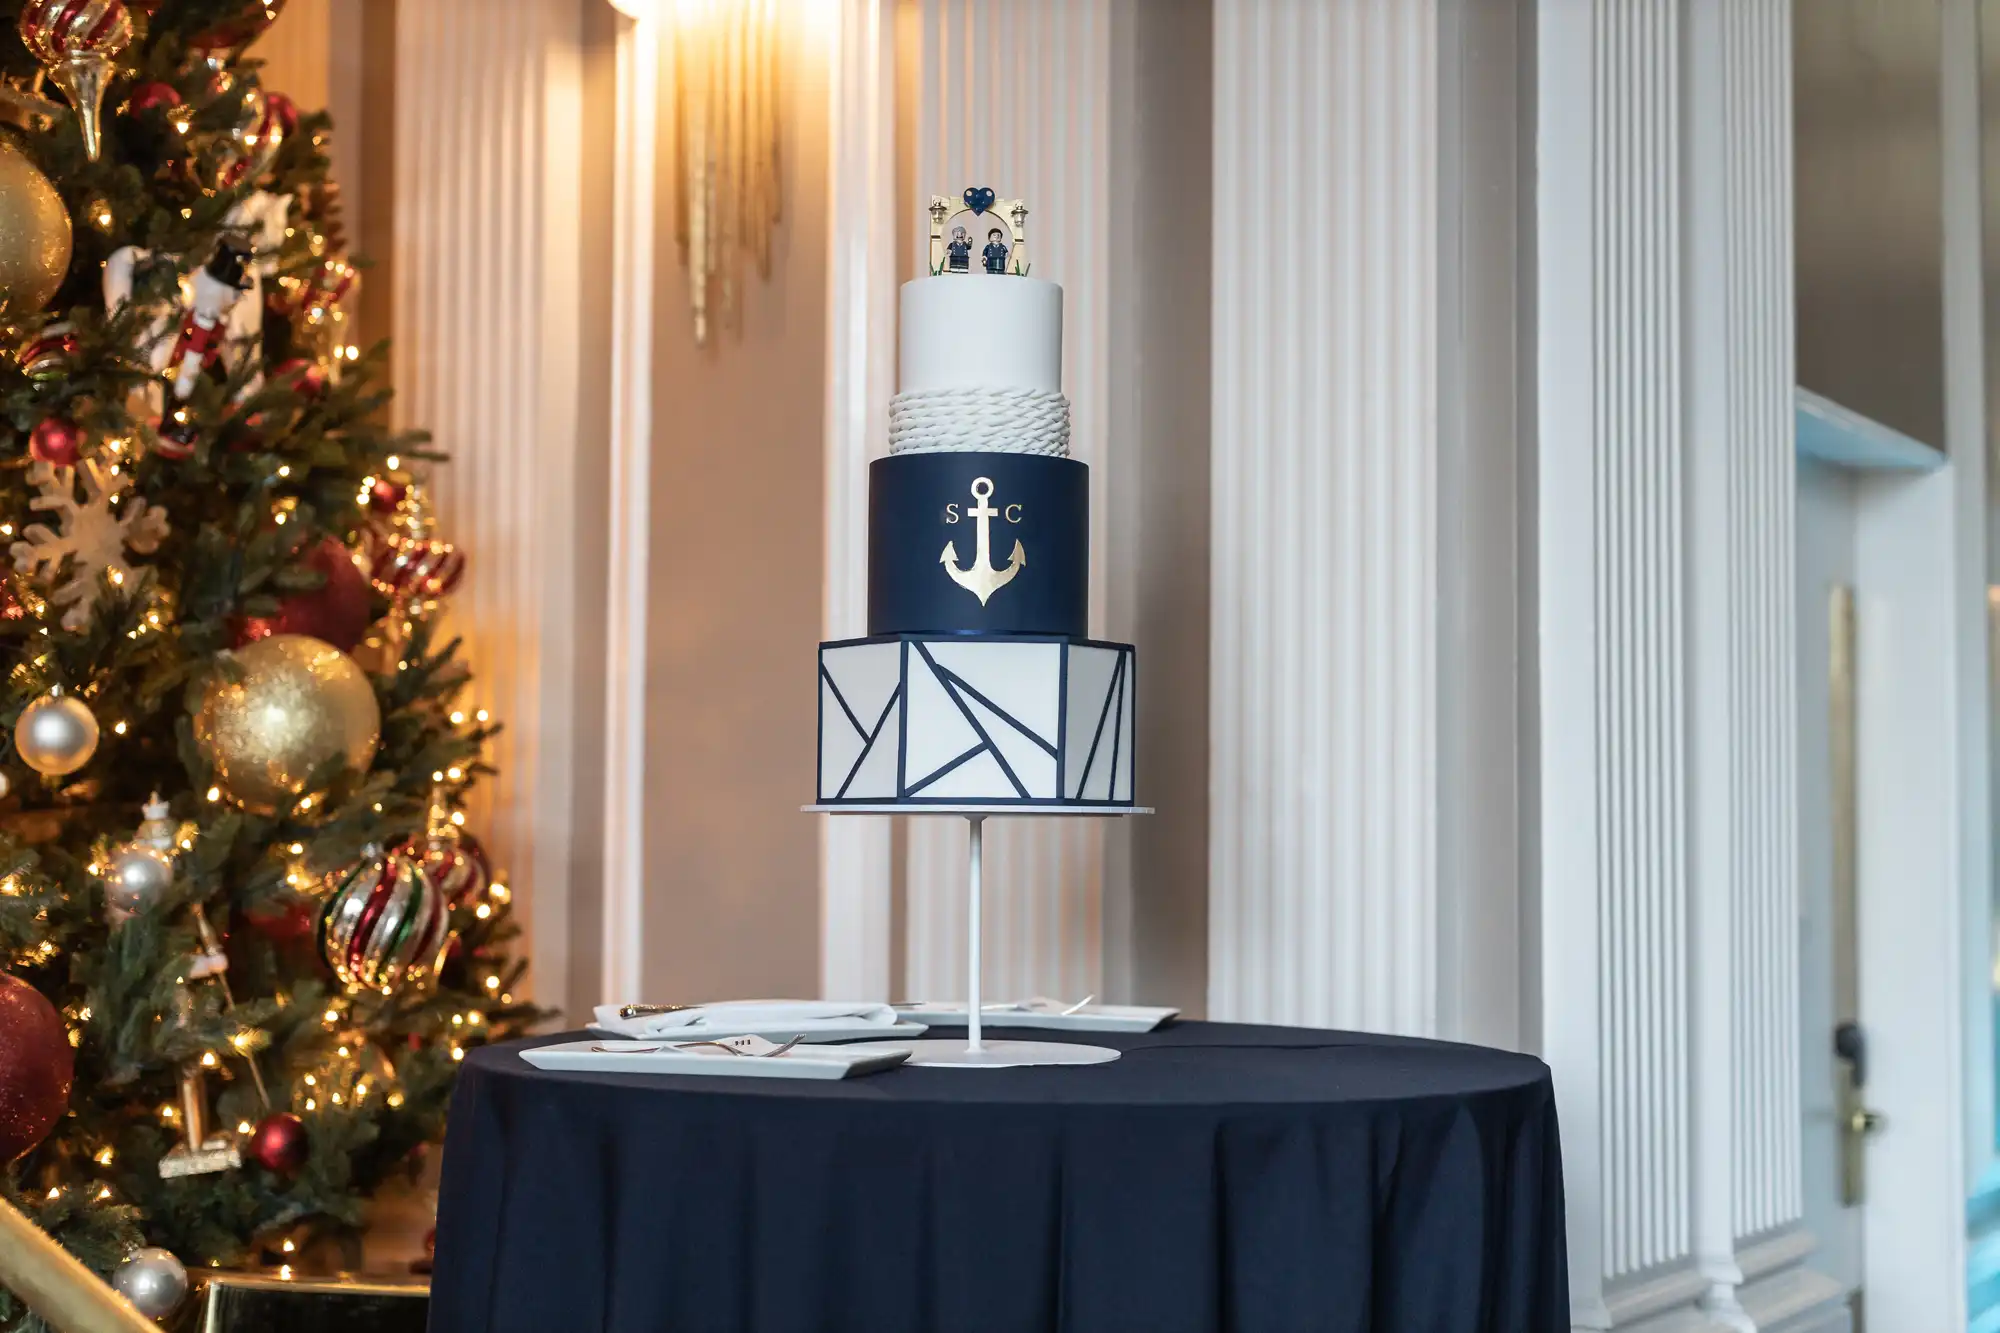 A three-tier navy and white cake with an anchor design sits on a round table, which is covered with a dark tablecloth. A decorated Christmas tree is seen in the background on the left.